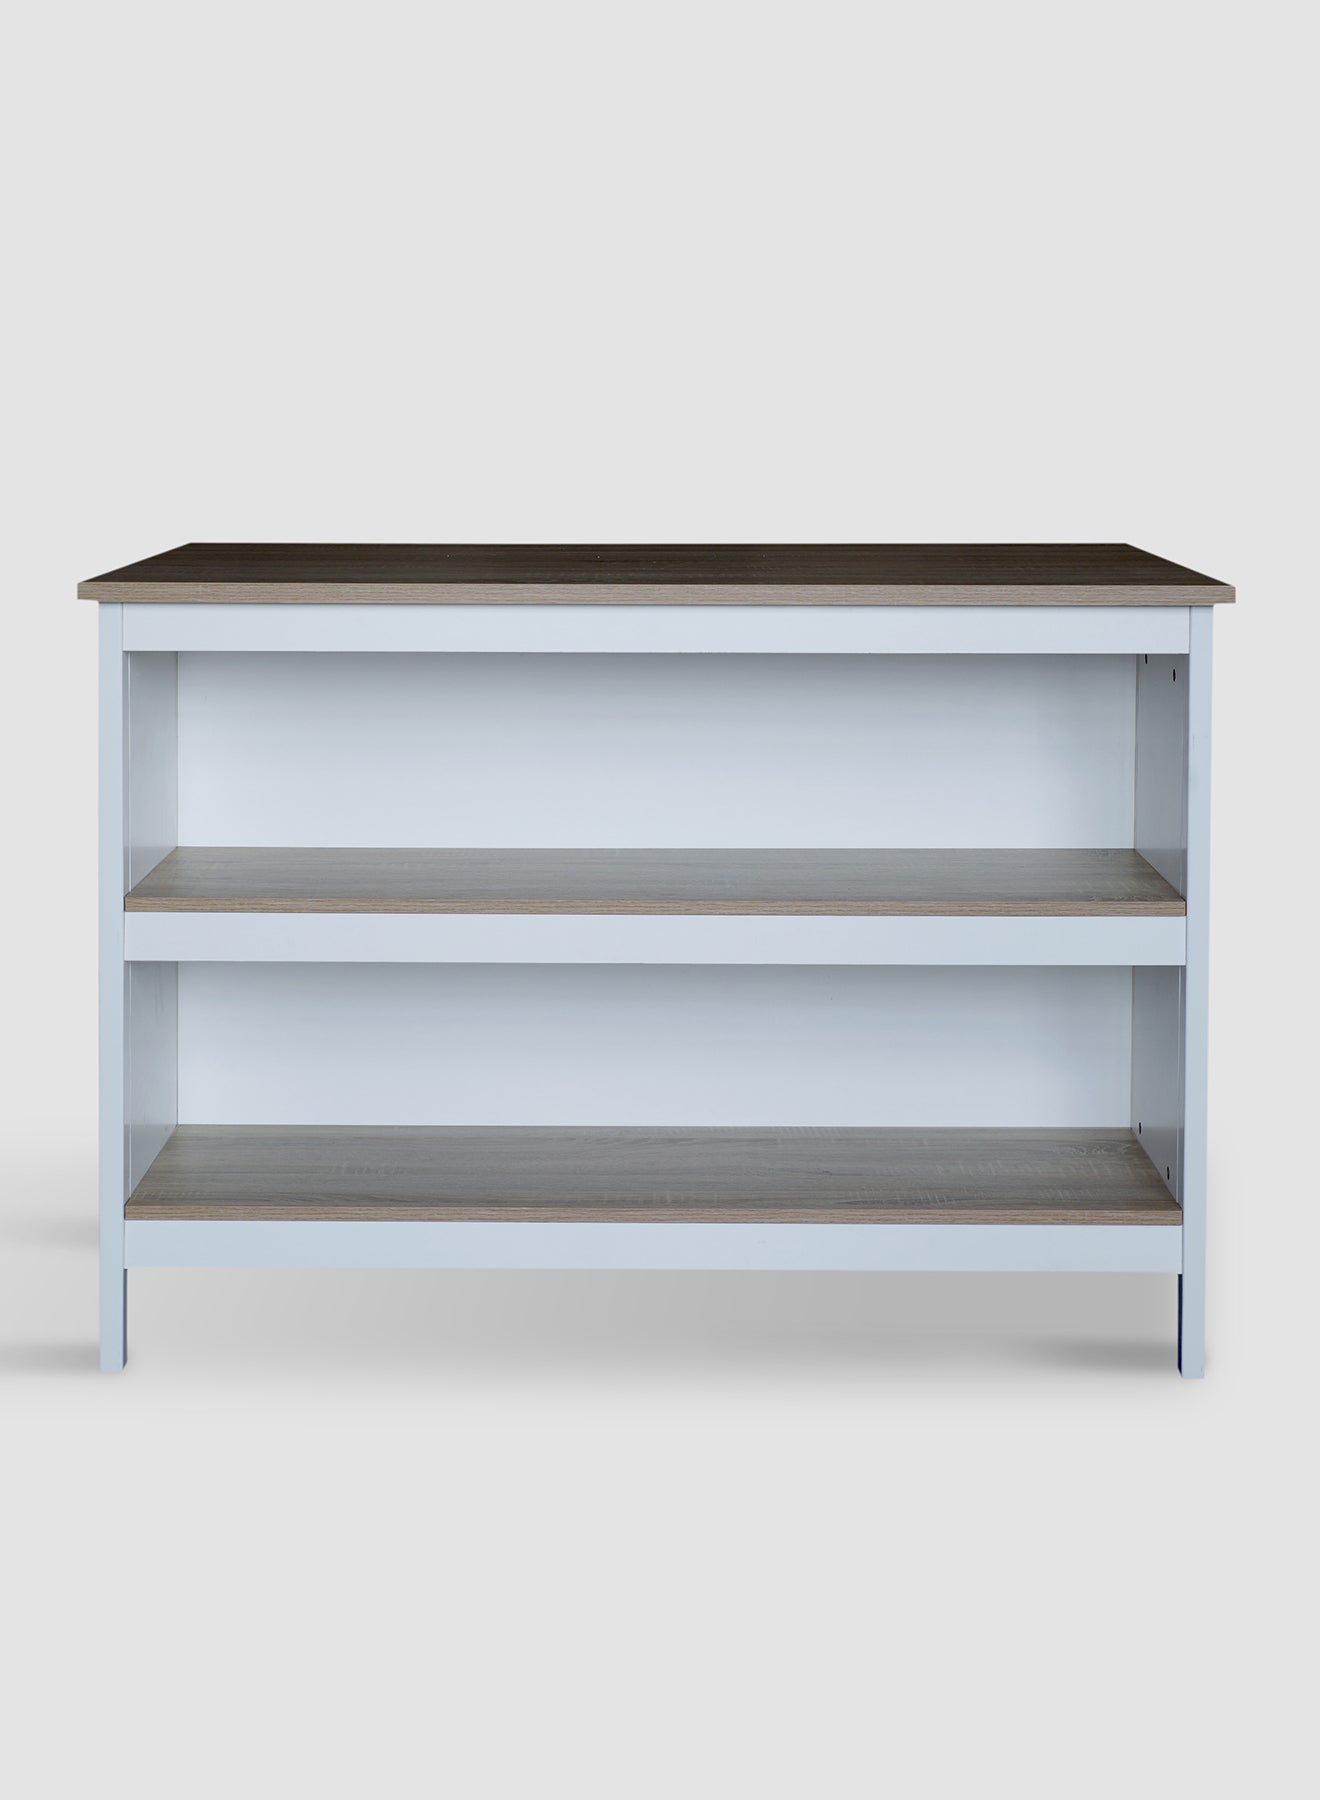 Buffet Table By In A White Color - Size 1260 X 770 X 900 - Cabinet For Storage 